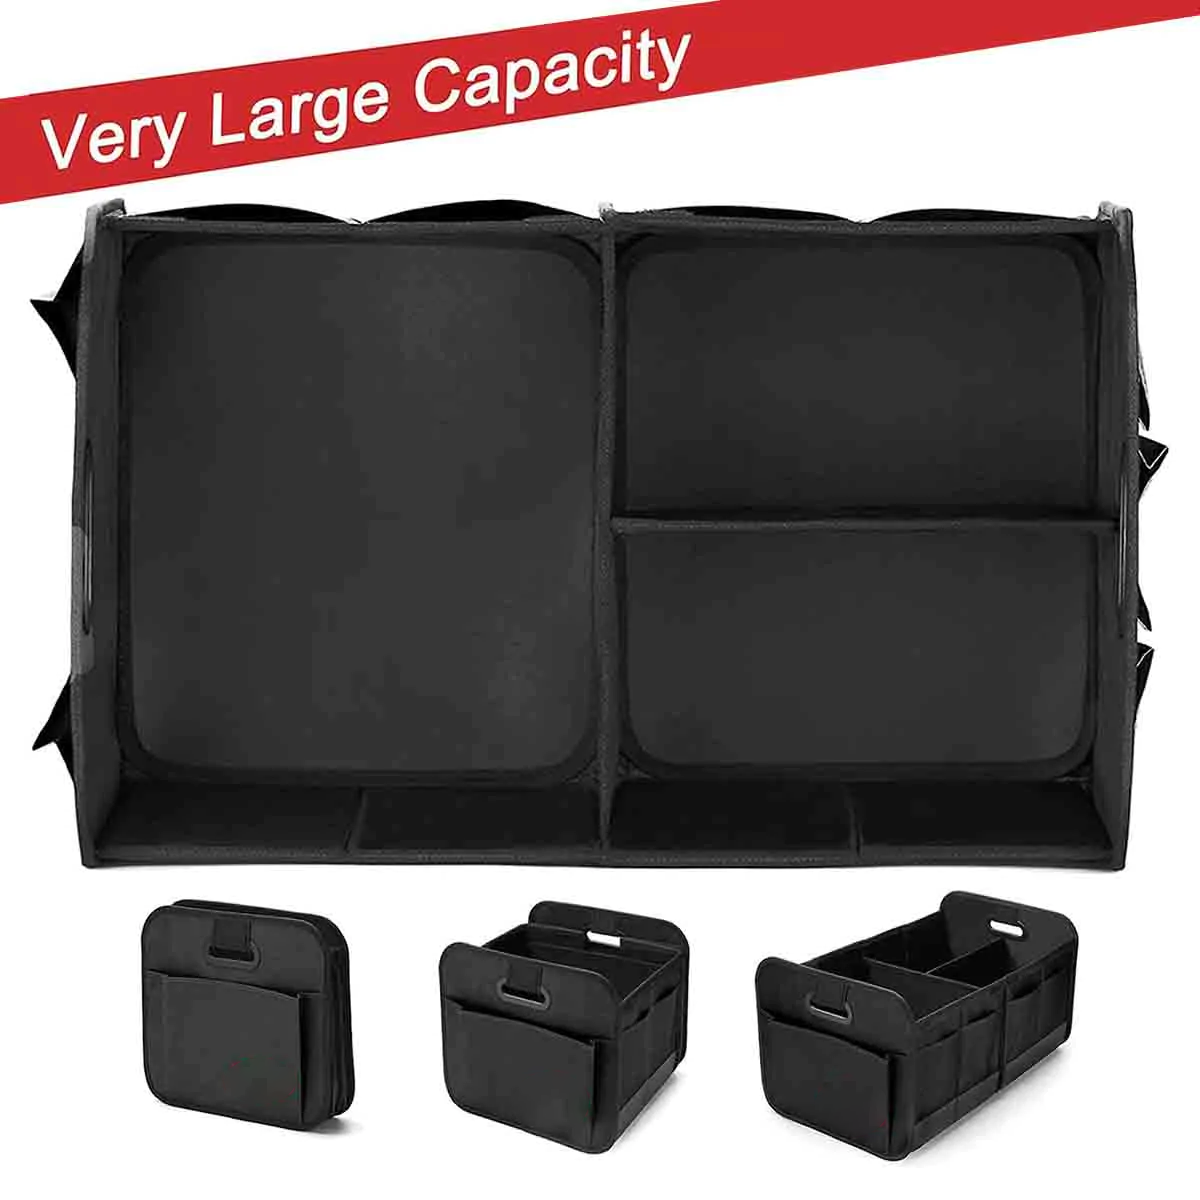 Custom Text For Car Trunk Organizer Storage, Compatible with All Cars, Reinforced Handles, Collapsible Multi, Compartment Car Organizers, Foldable and Waterproof, 600D Oxford Polyester LM12995